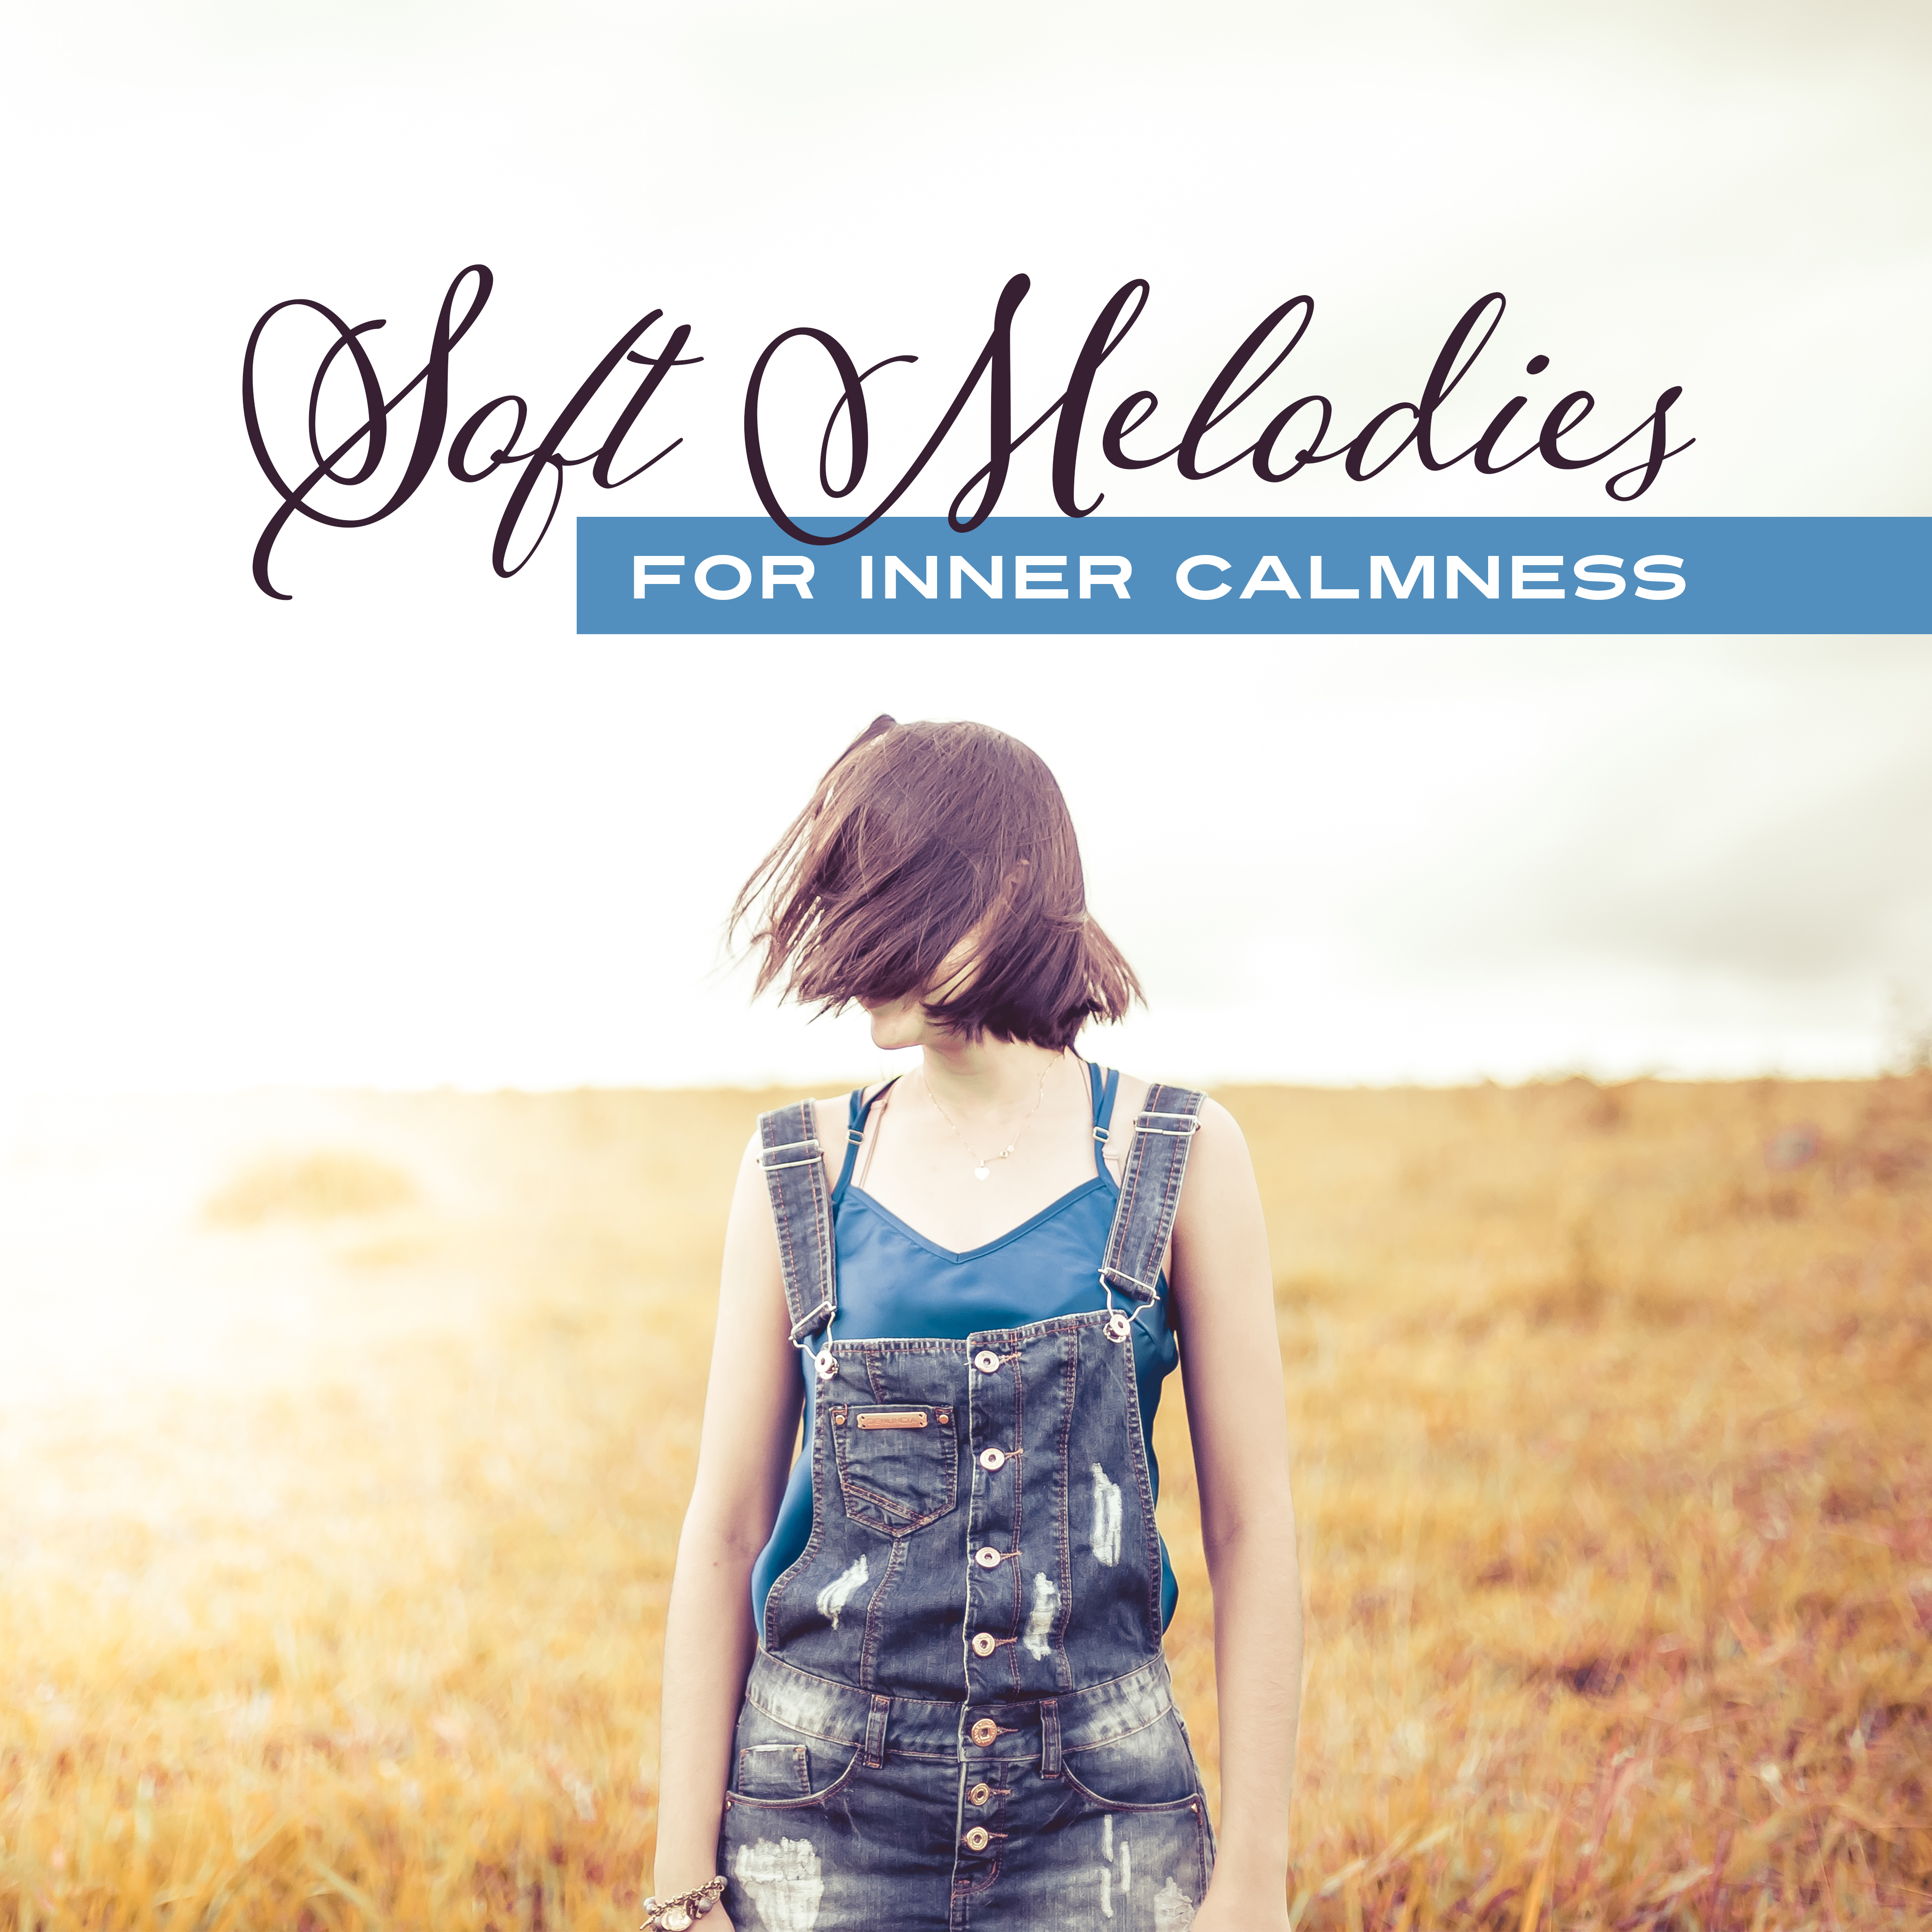 Soft Melodies for Inner Calmness  Calm Down  Relax with New Age Sounds, Peaceful Mind  Body, Soothing Waves to Rest